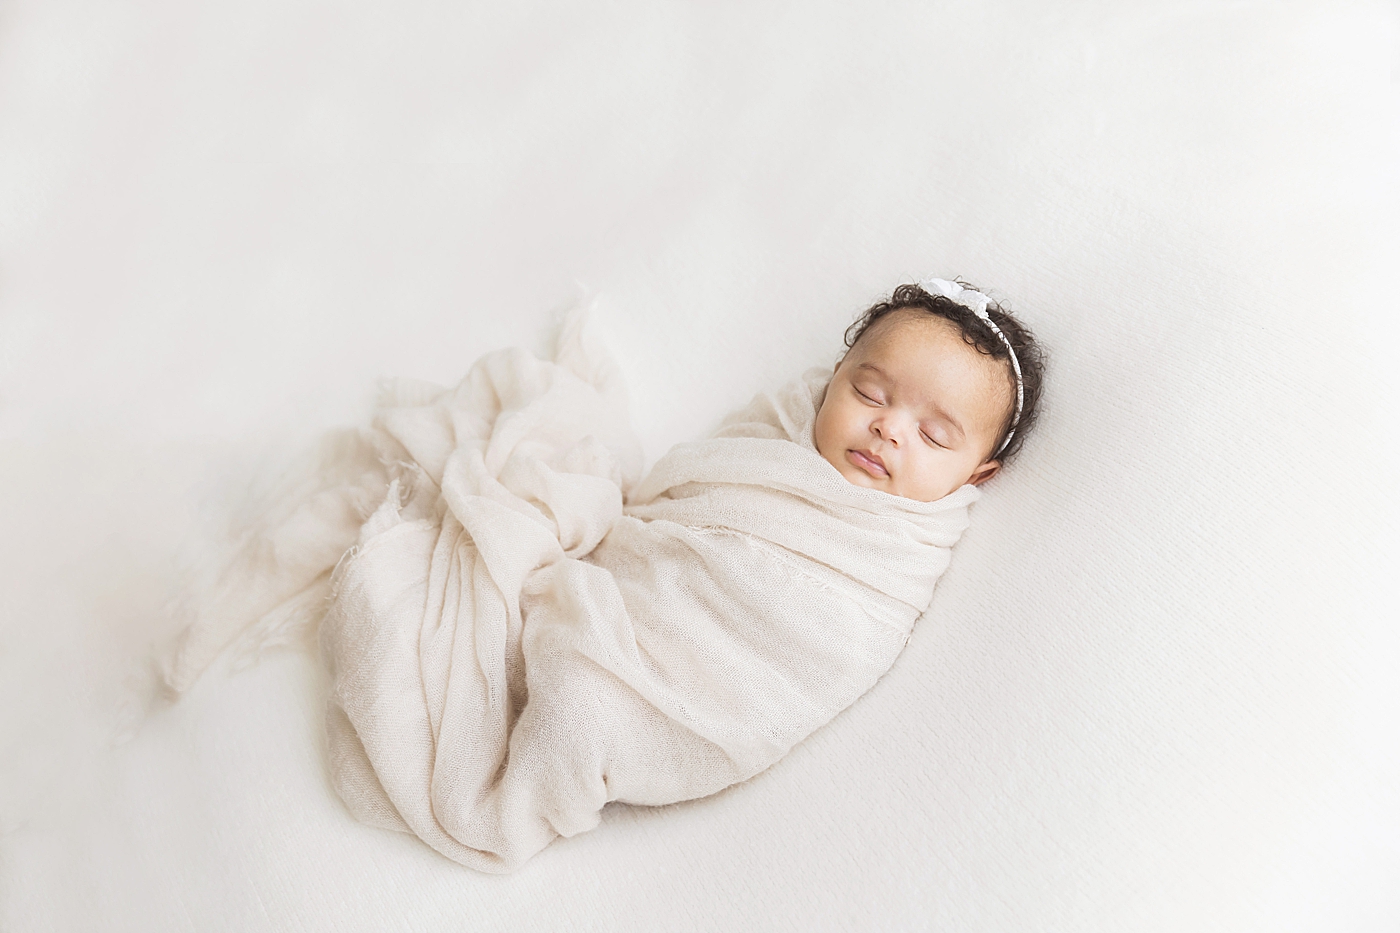 Baby girl swaddled in blanket for newborn photos at six weeks old. Photo by Fresh Light Photography.